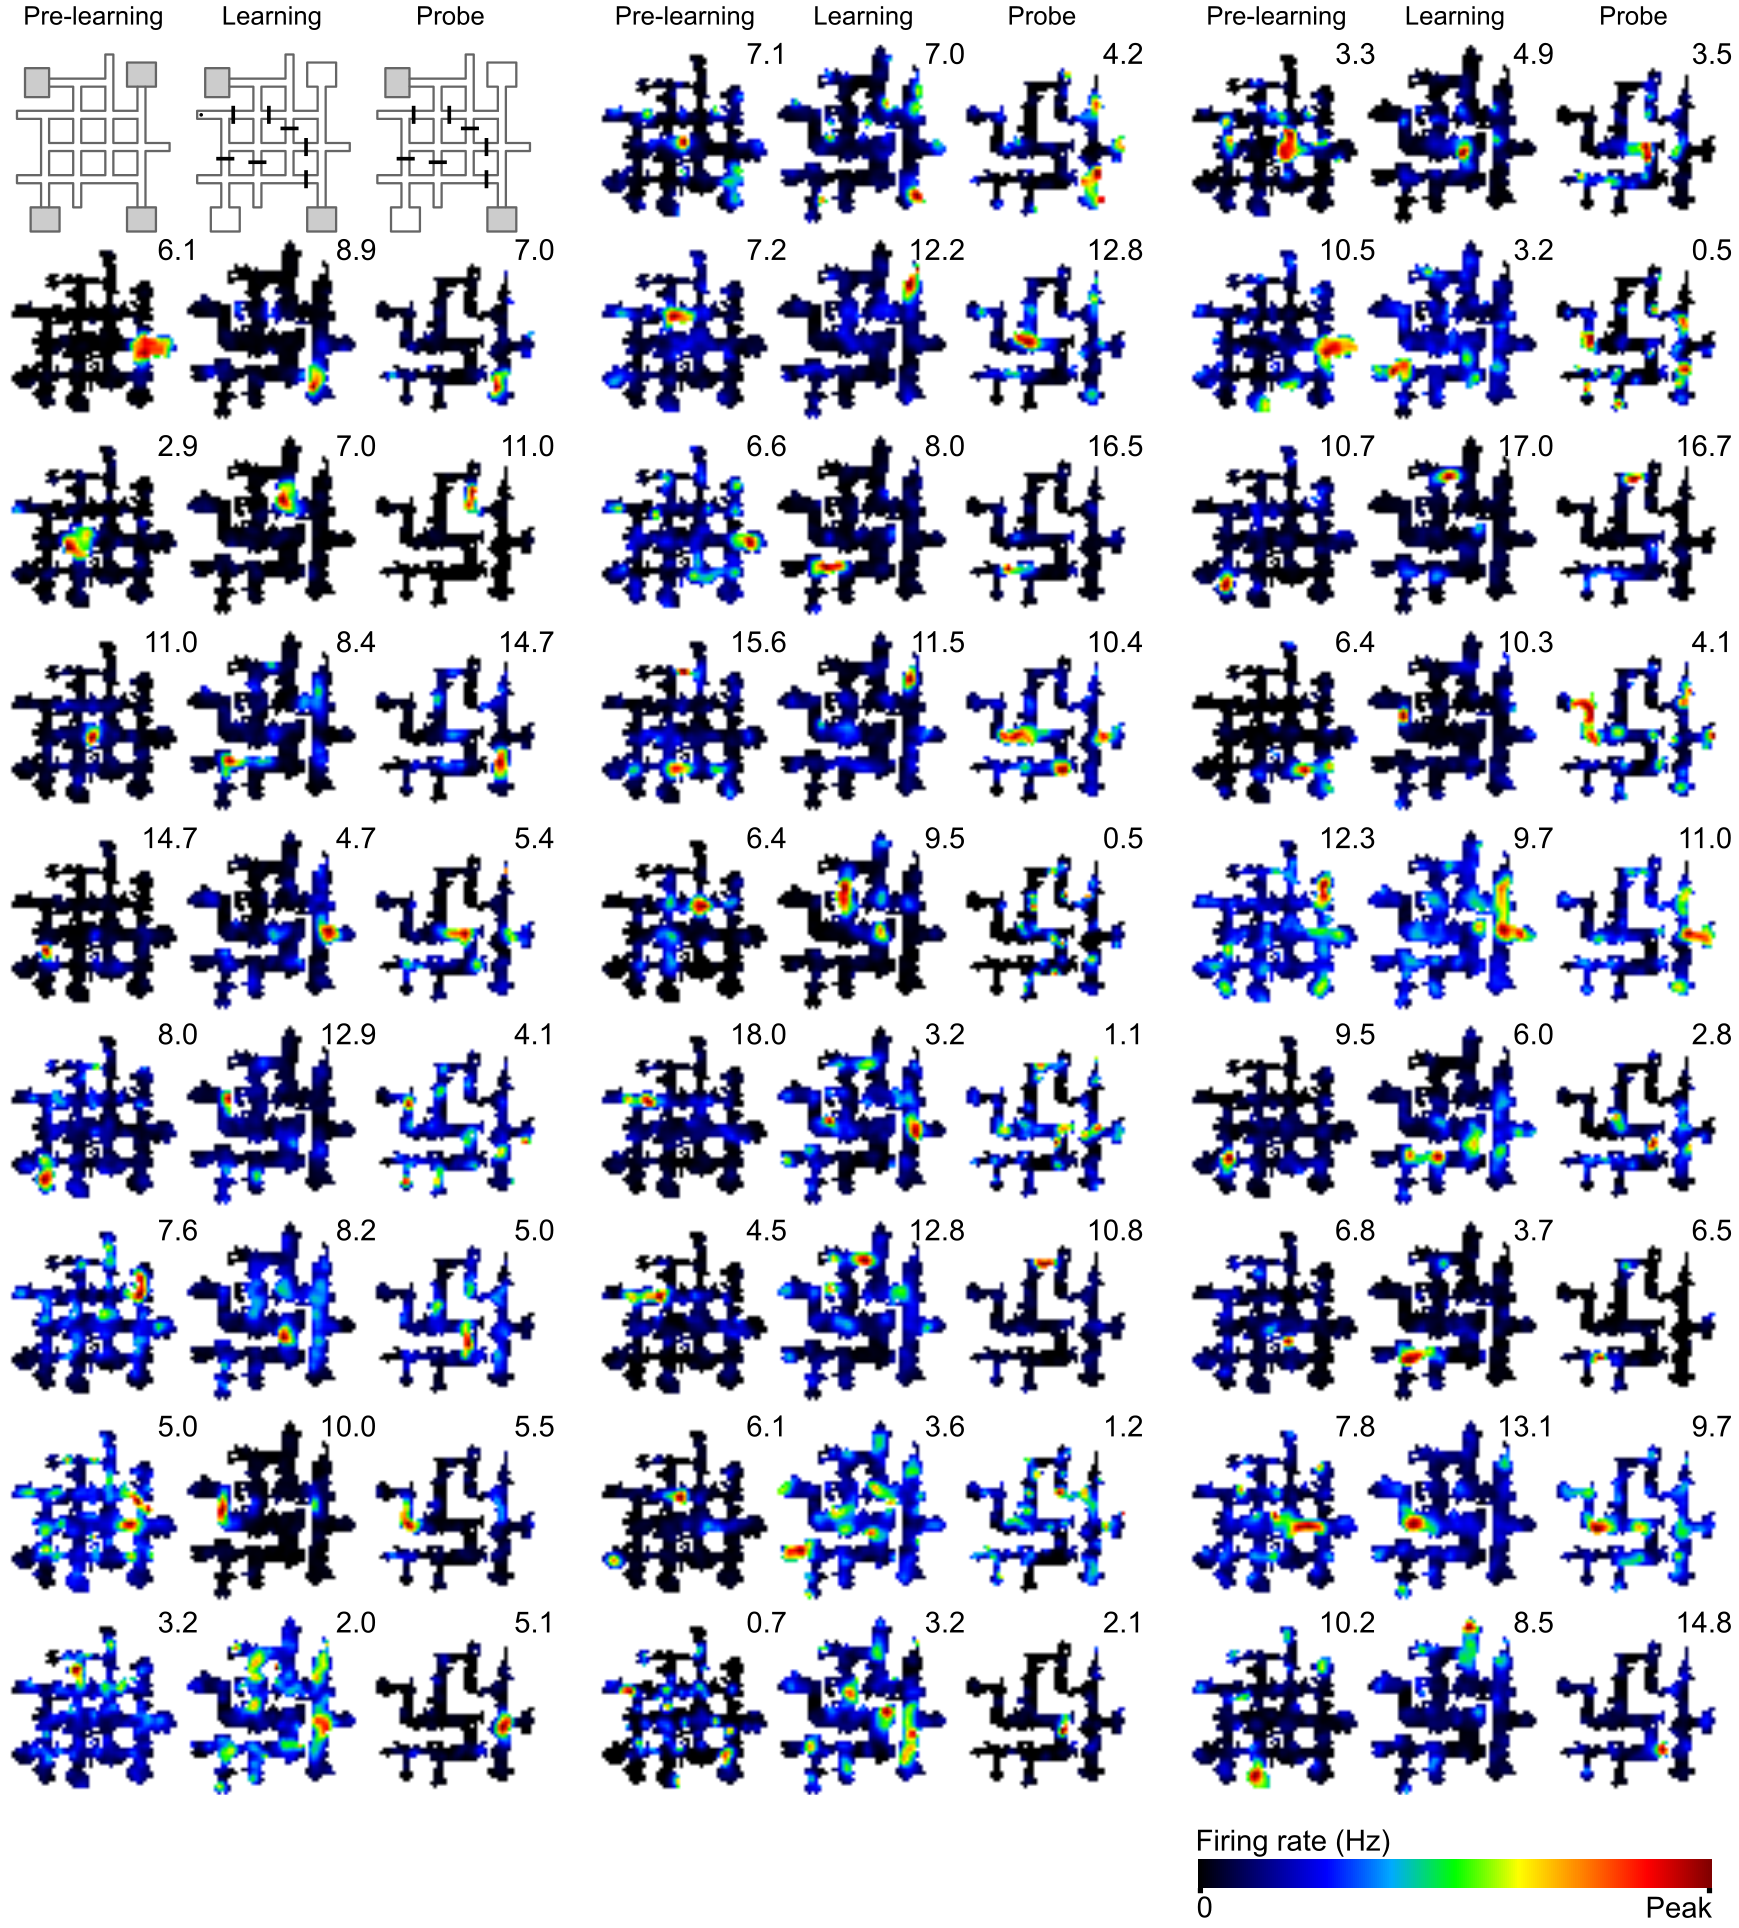 Place cell action potential firing heat maps on the crossword maze